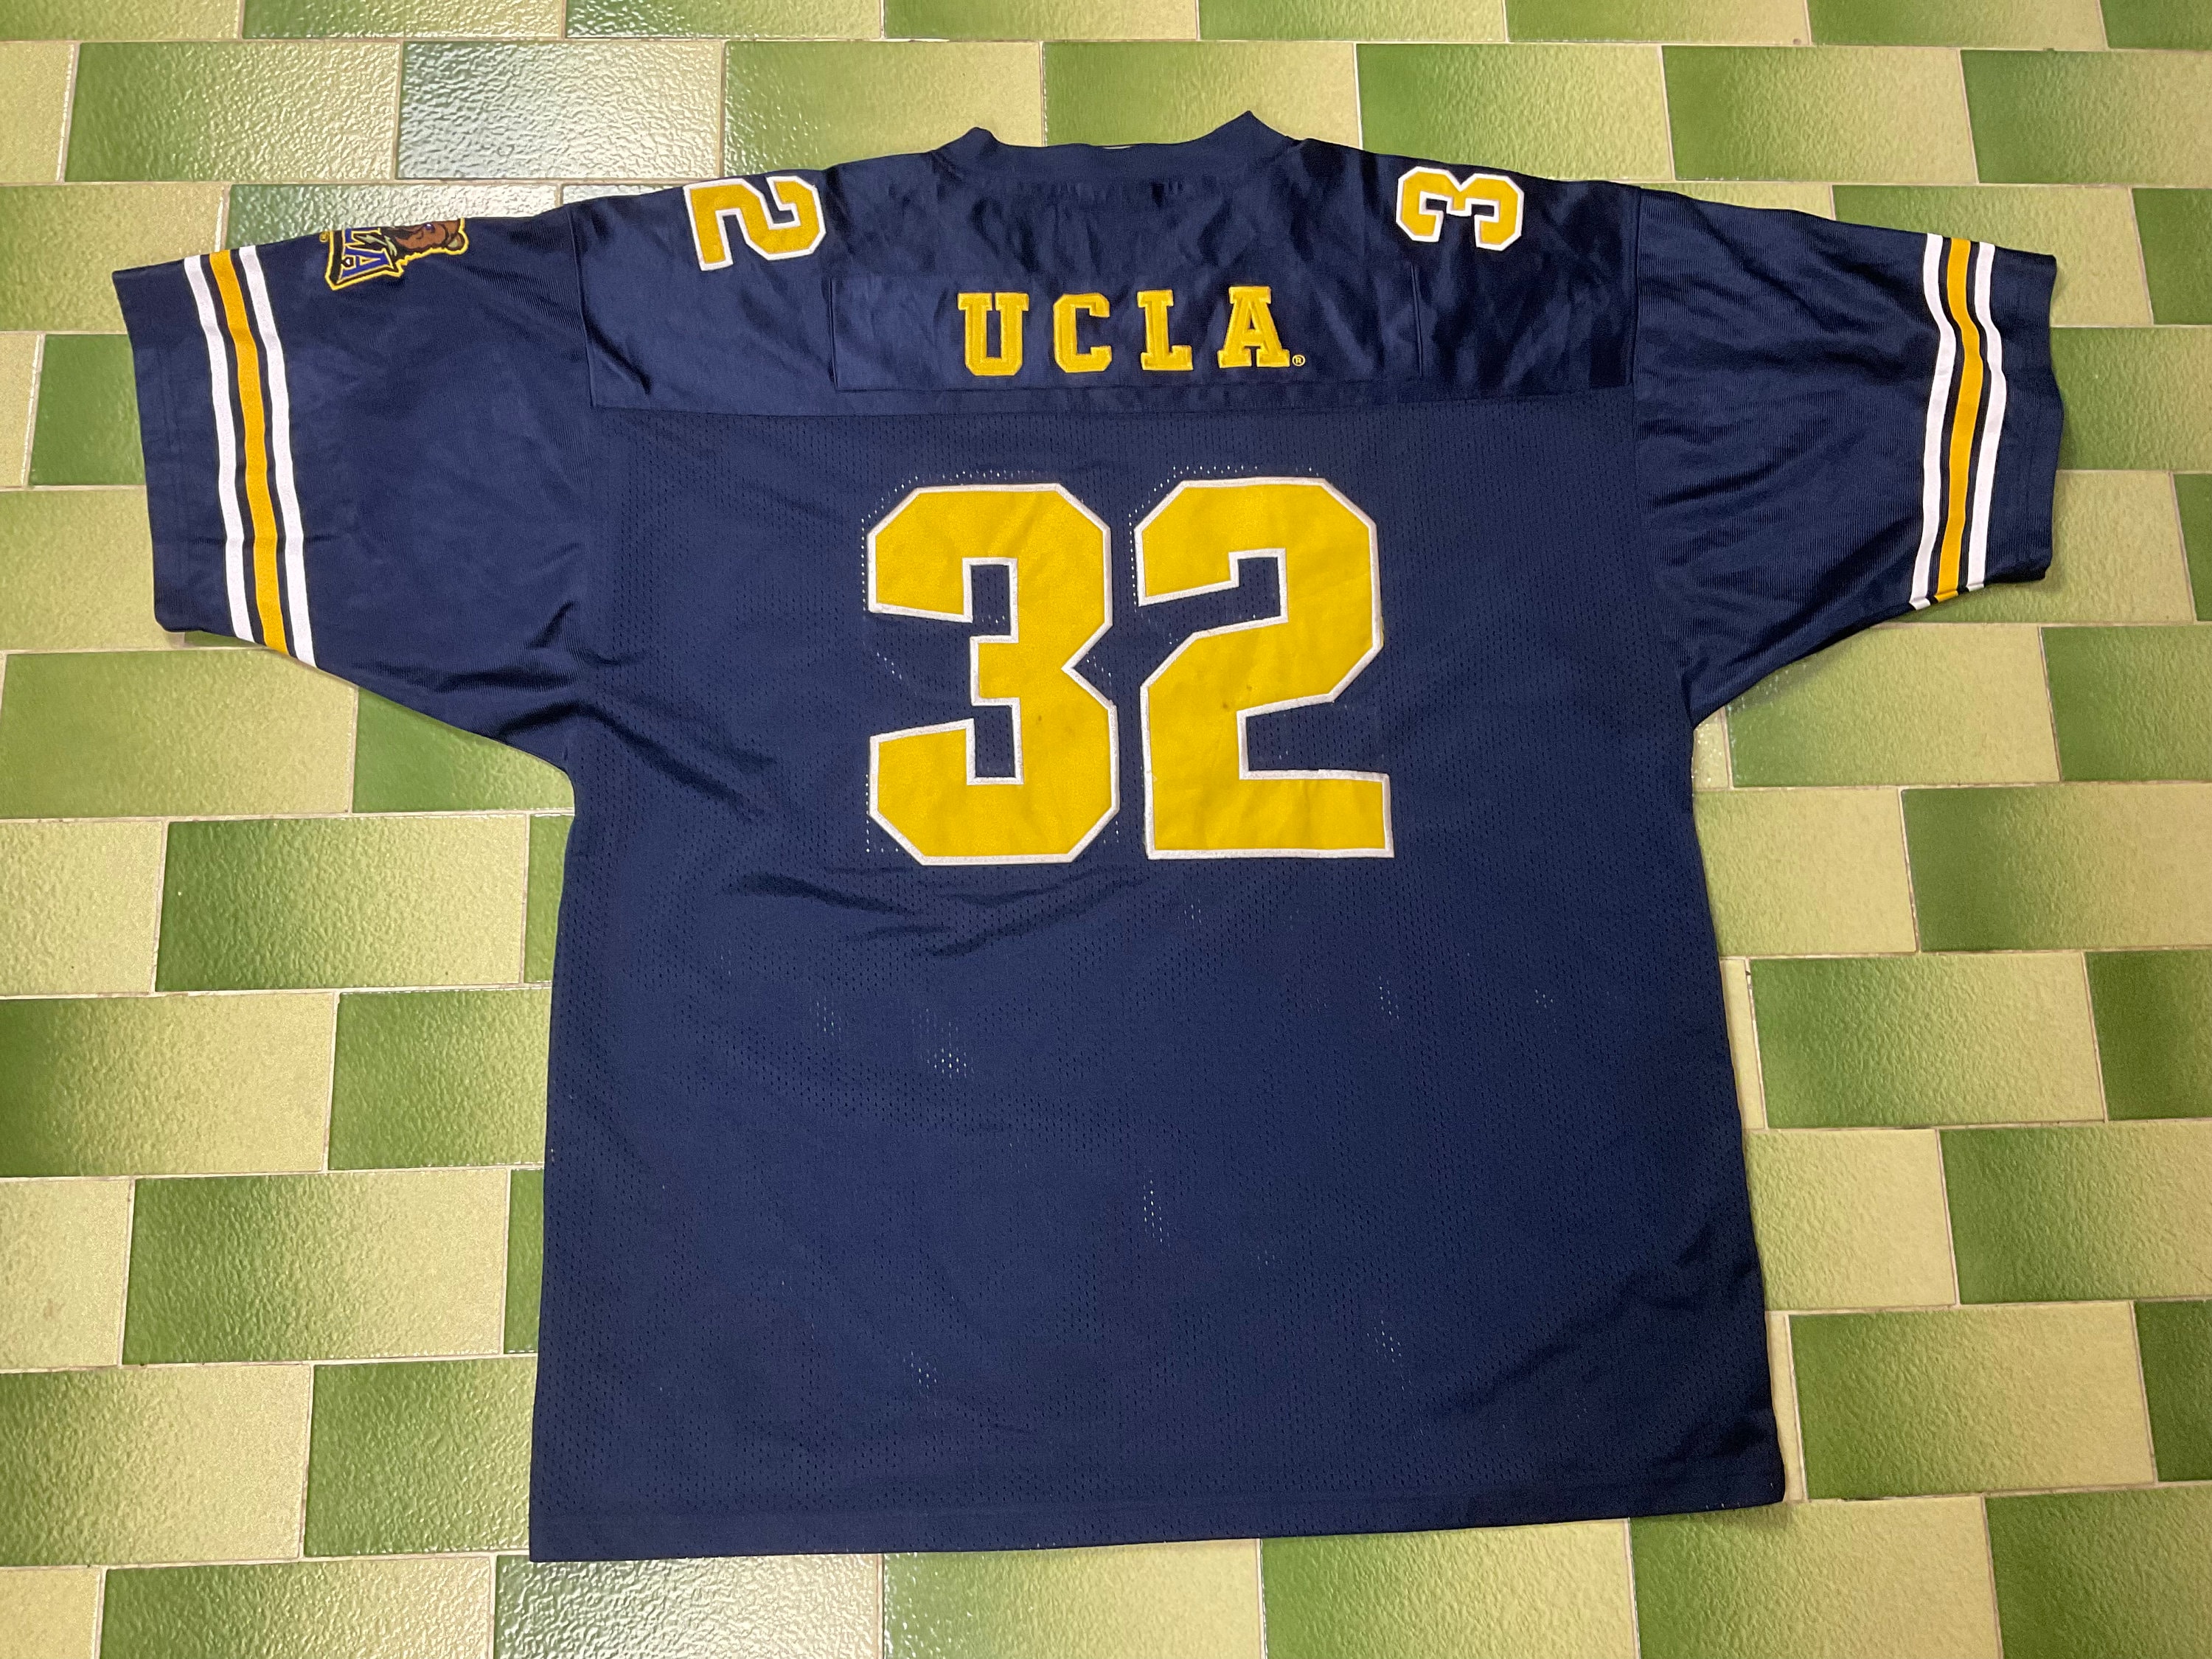 Youth Colosseum Blue/White UCLA Bruins Football Jersey and Pants Set